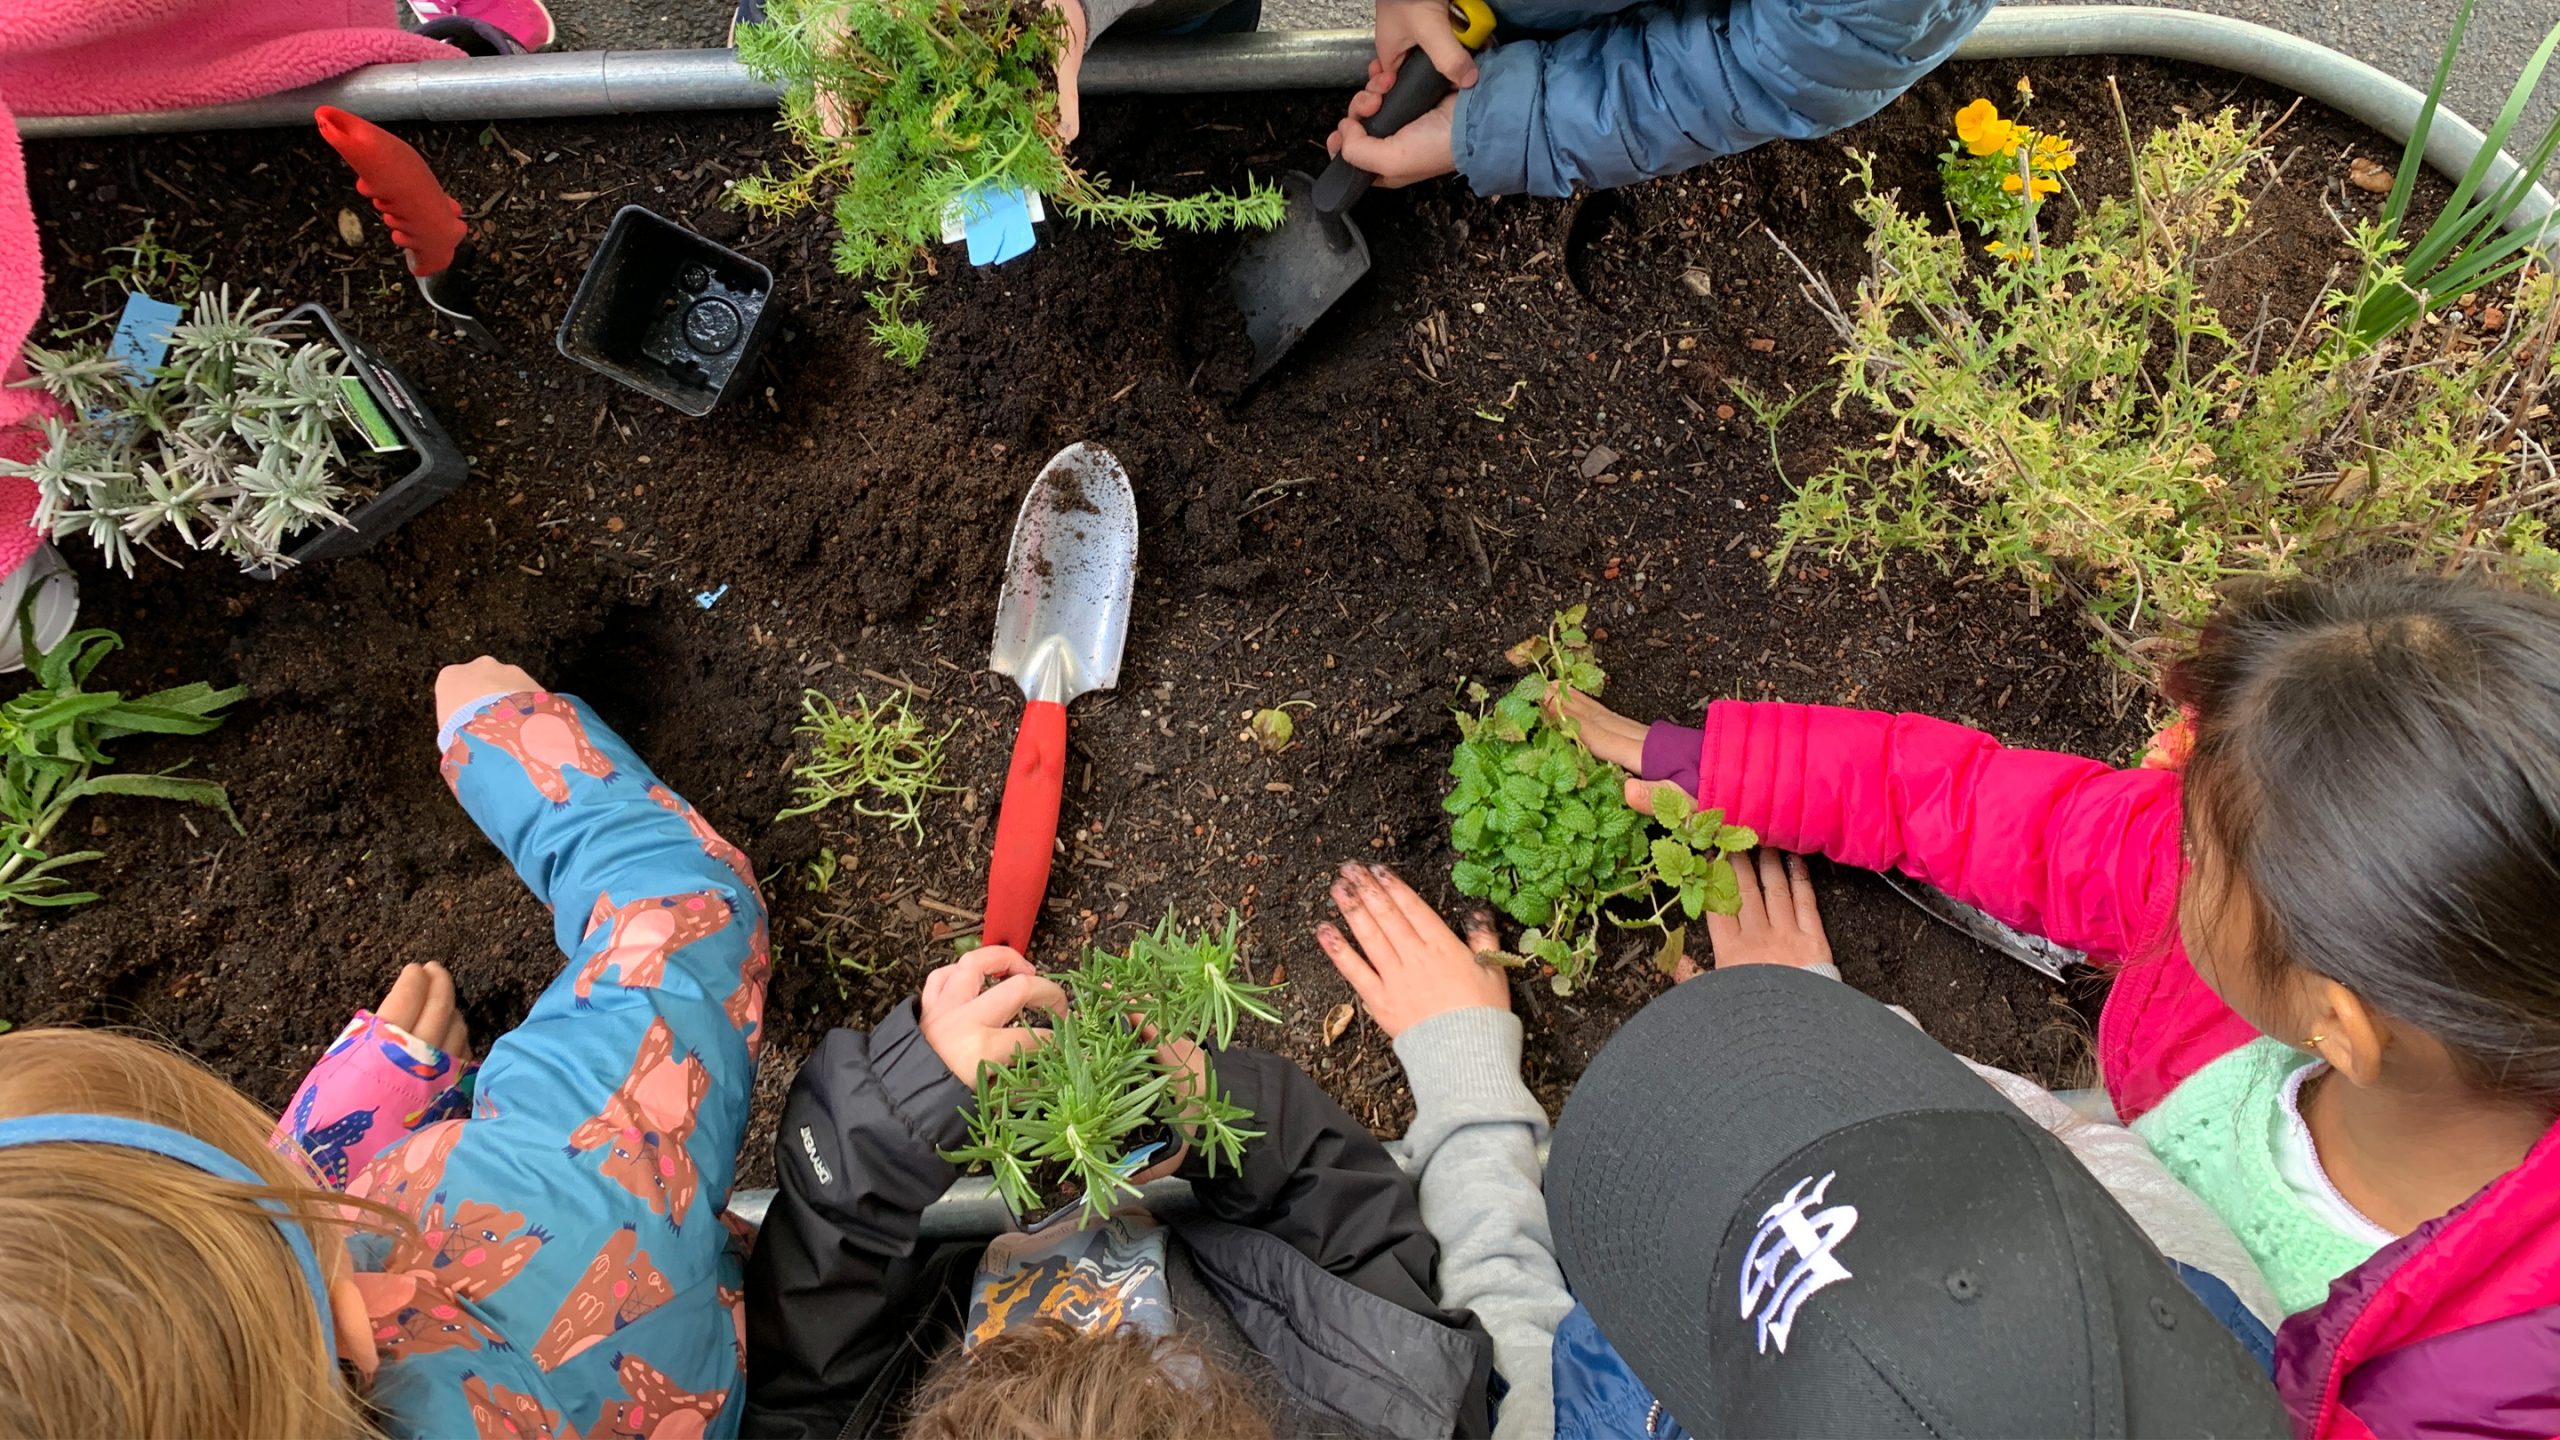 Growing Herbs and community engagement